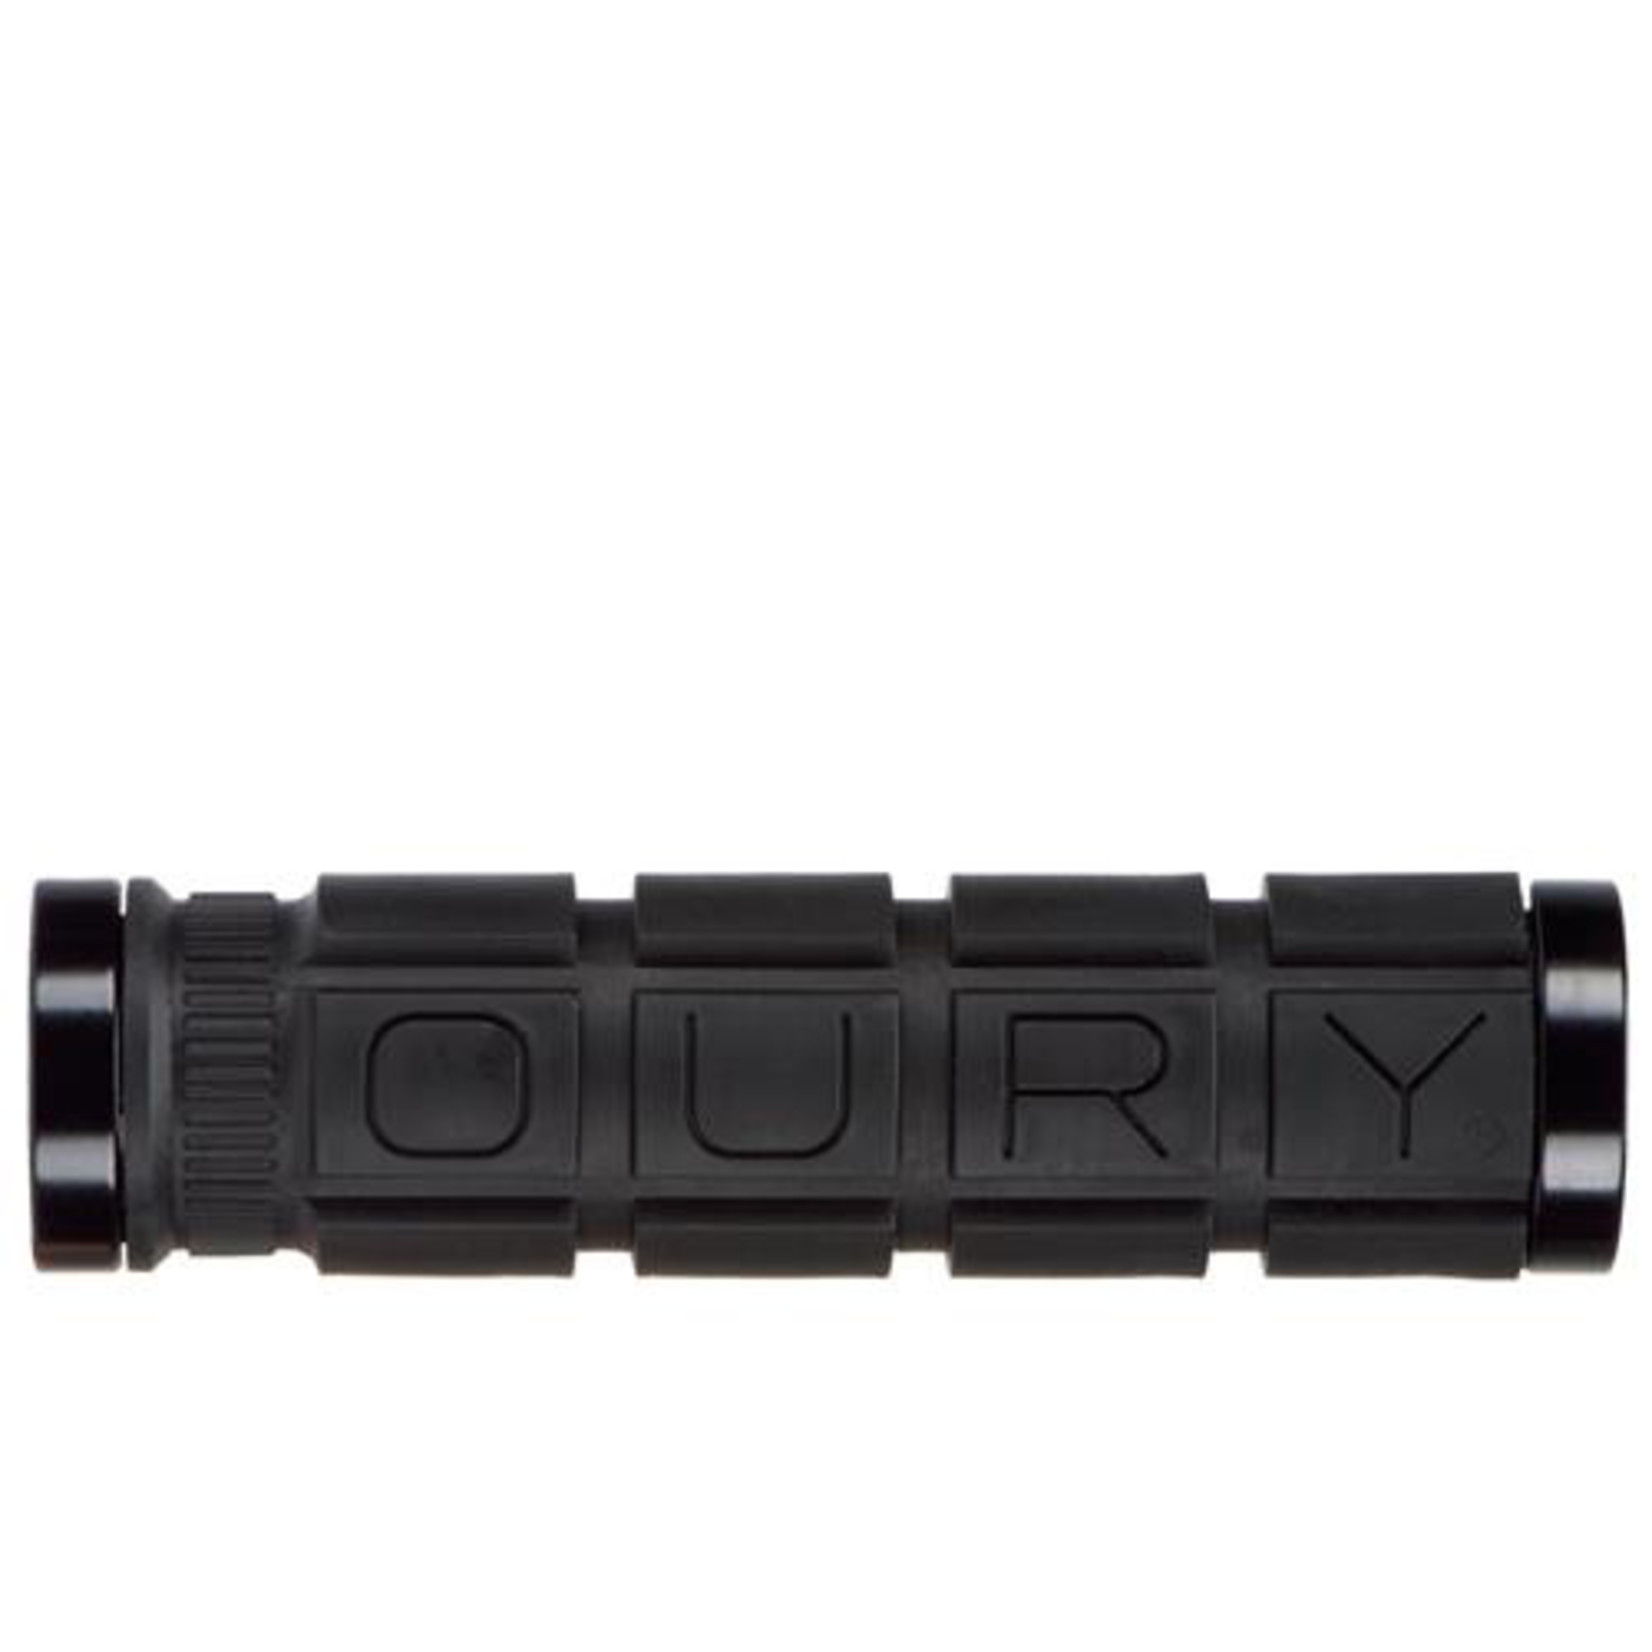 Oury Oury - Handlebar Grips - Lock-On Dual - Bike Grips - 130mm - Black